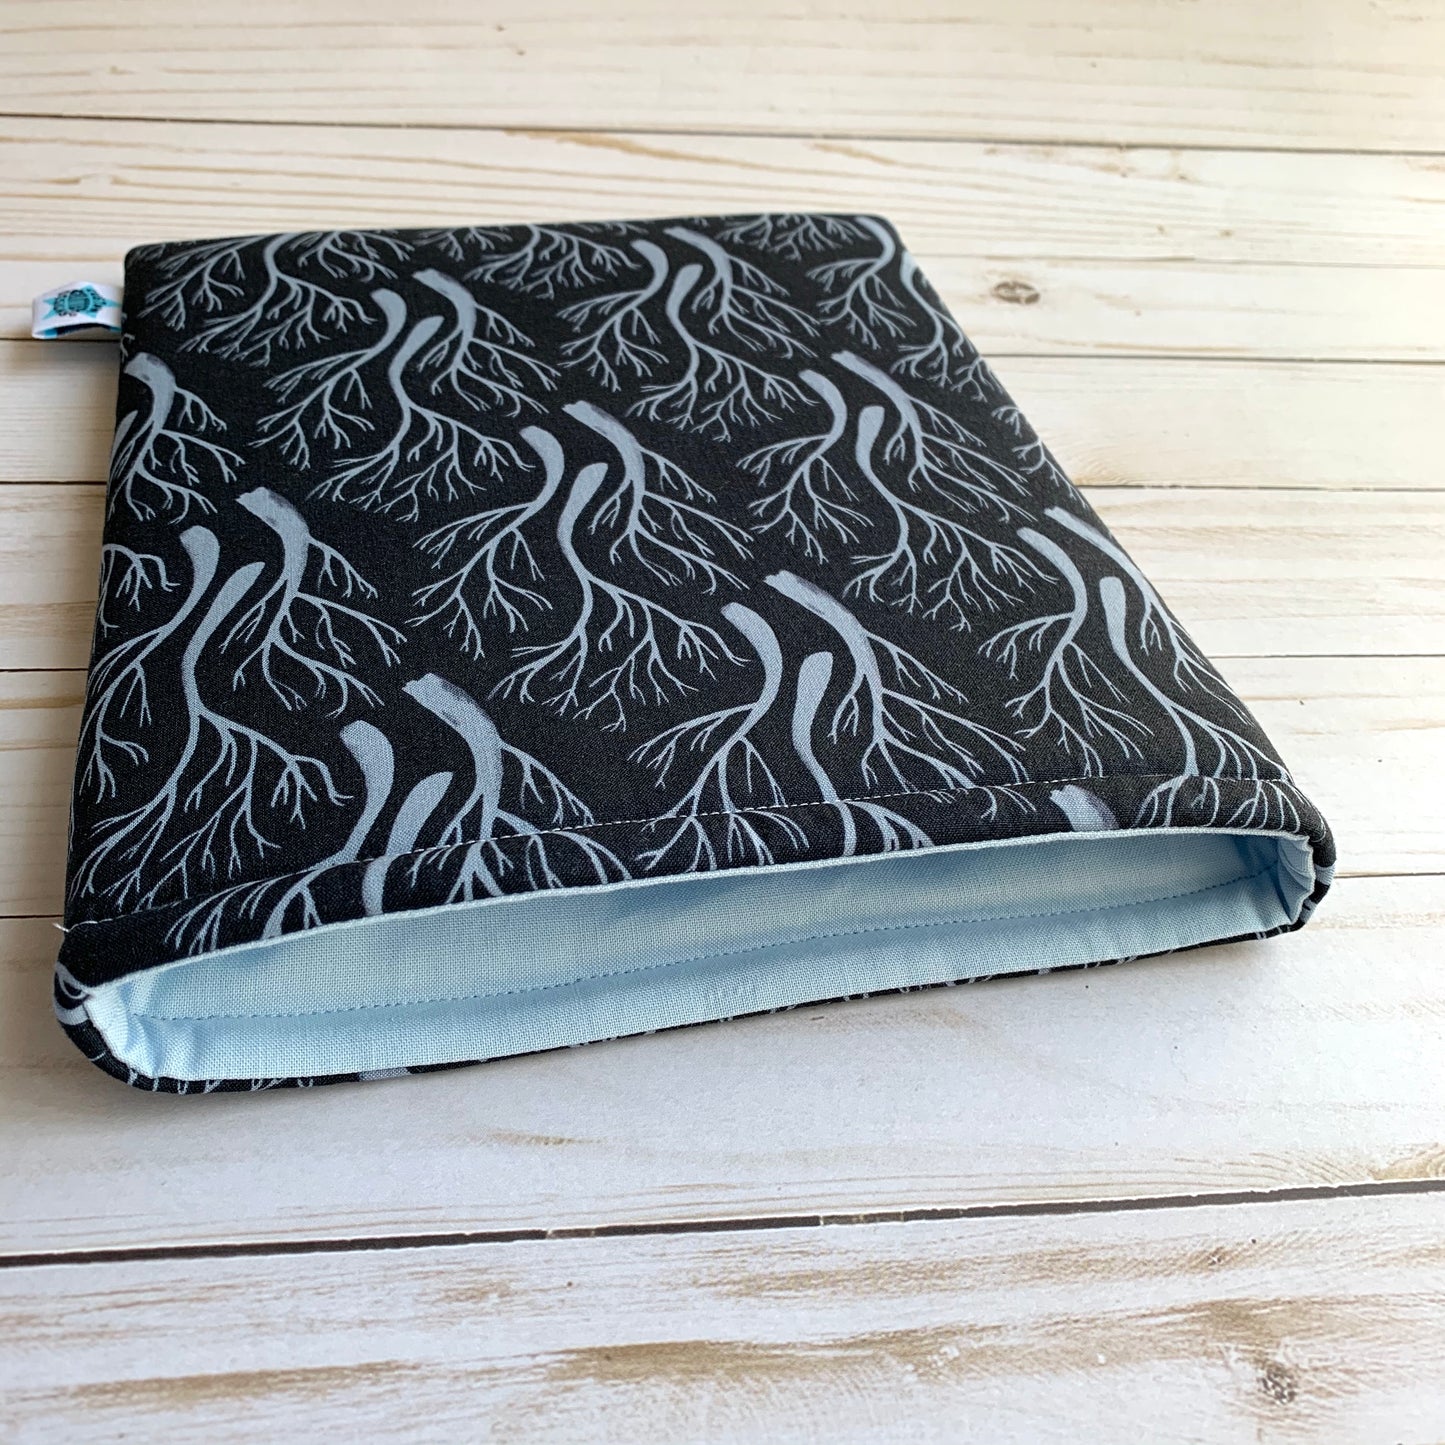 Silver Trees - Book Sleeve